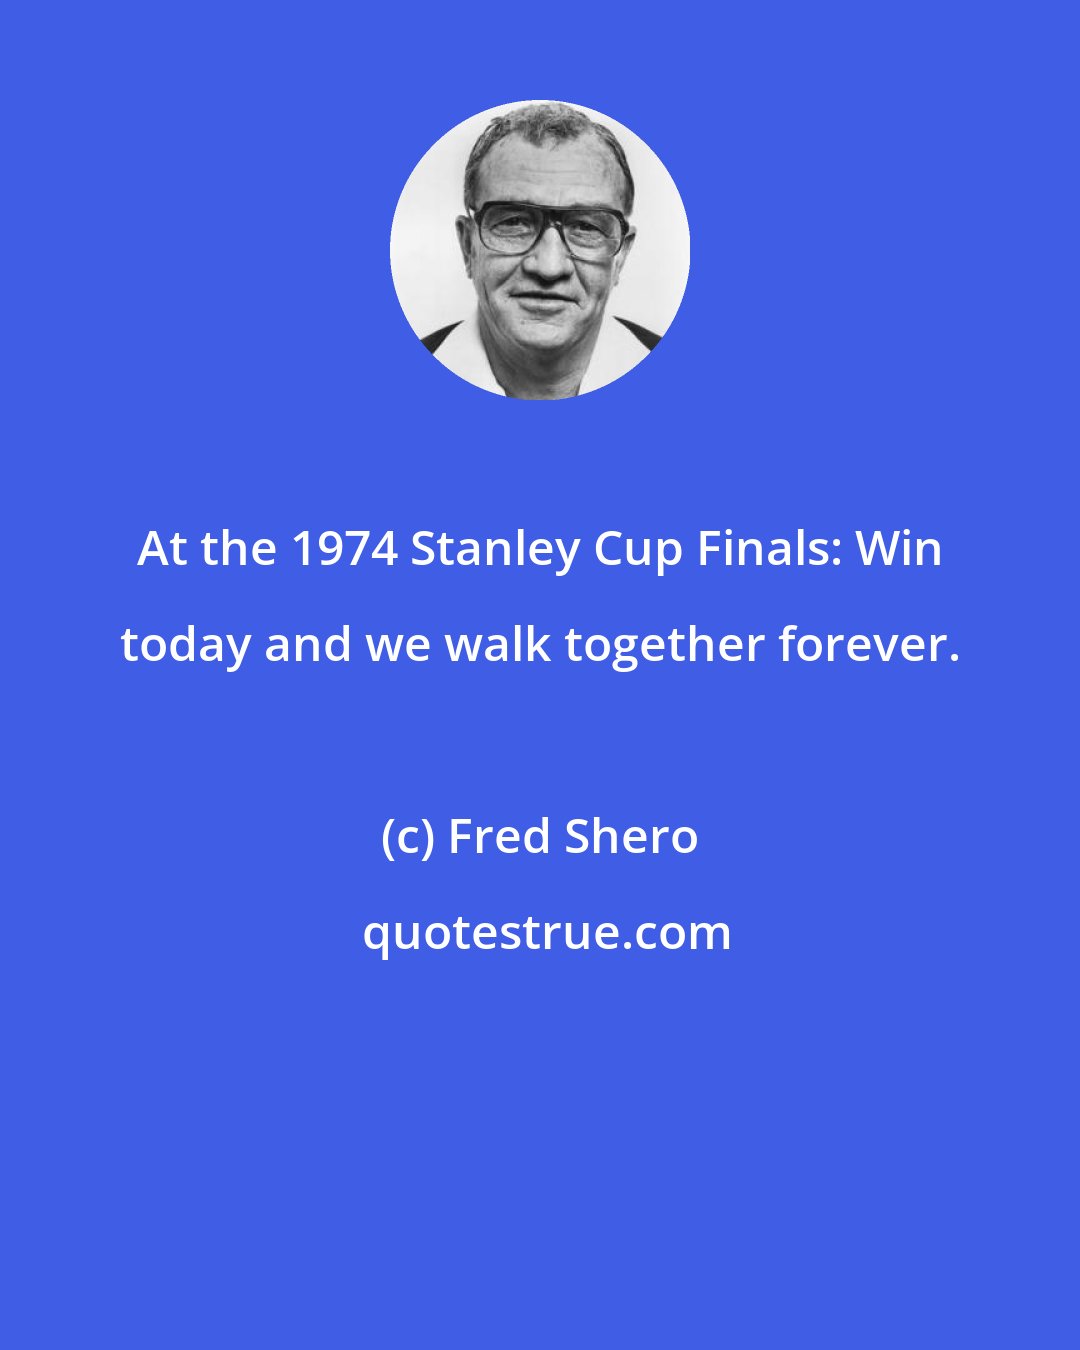 Fred Shero: At the 1974 Stanley Cup Finals: Win today and we walk together forever.